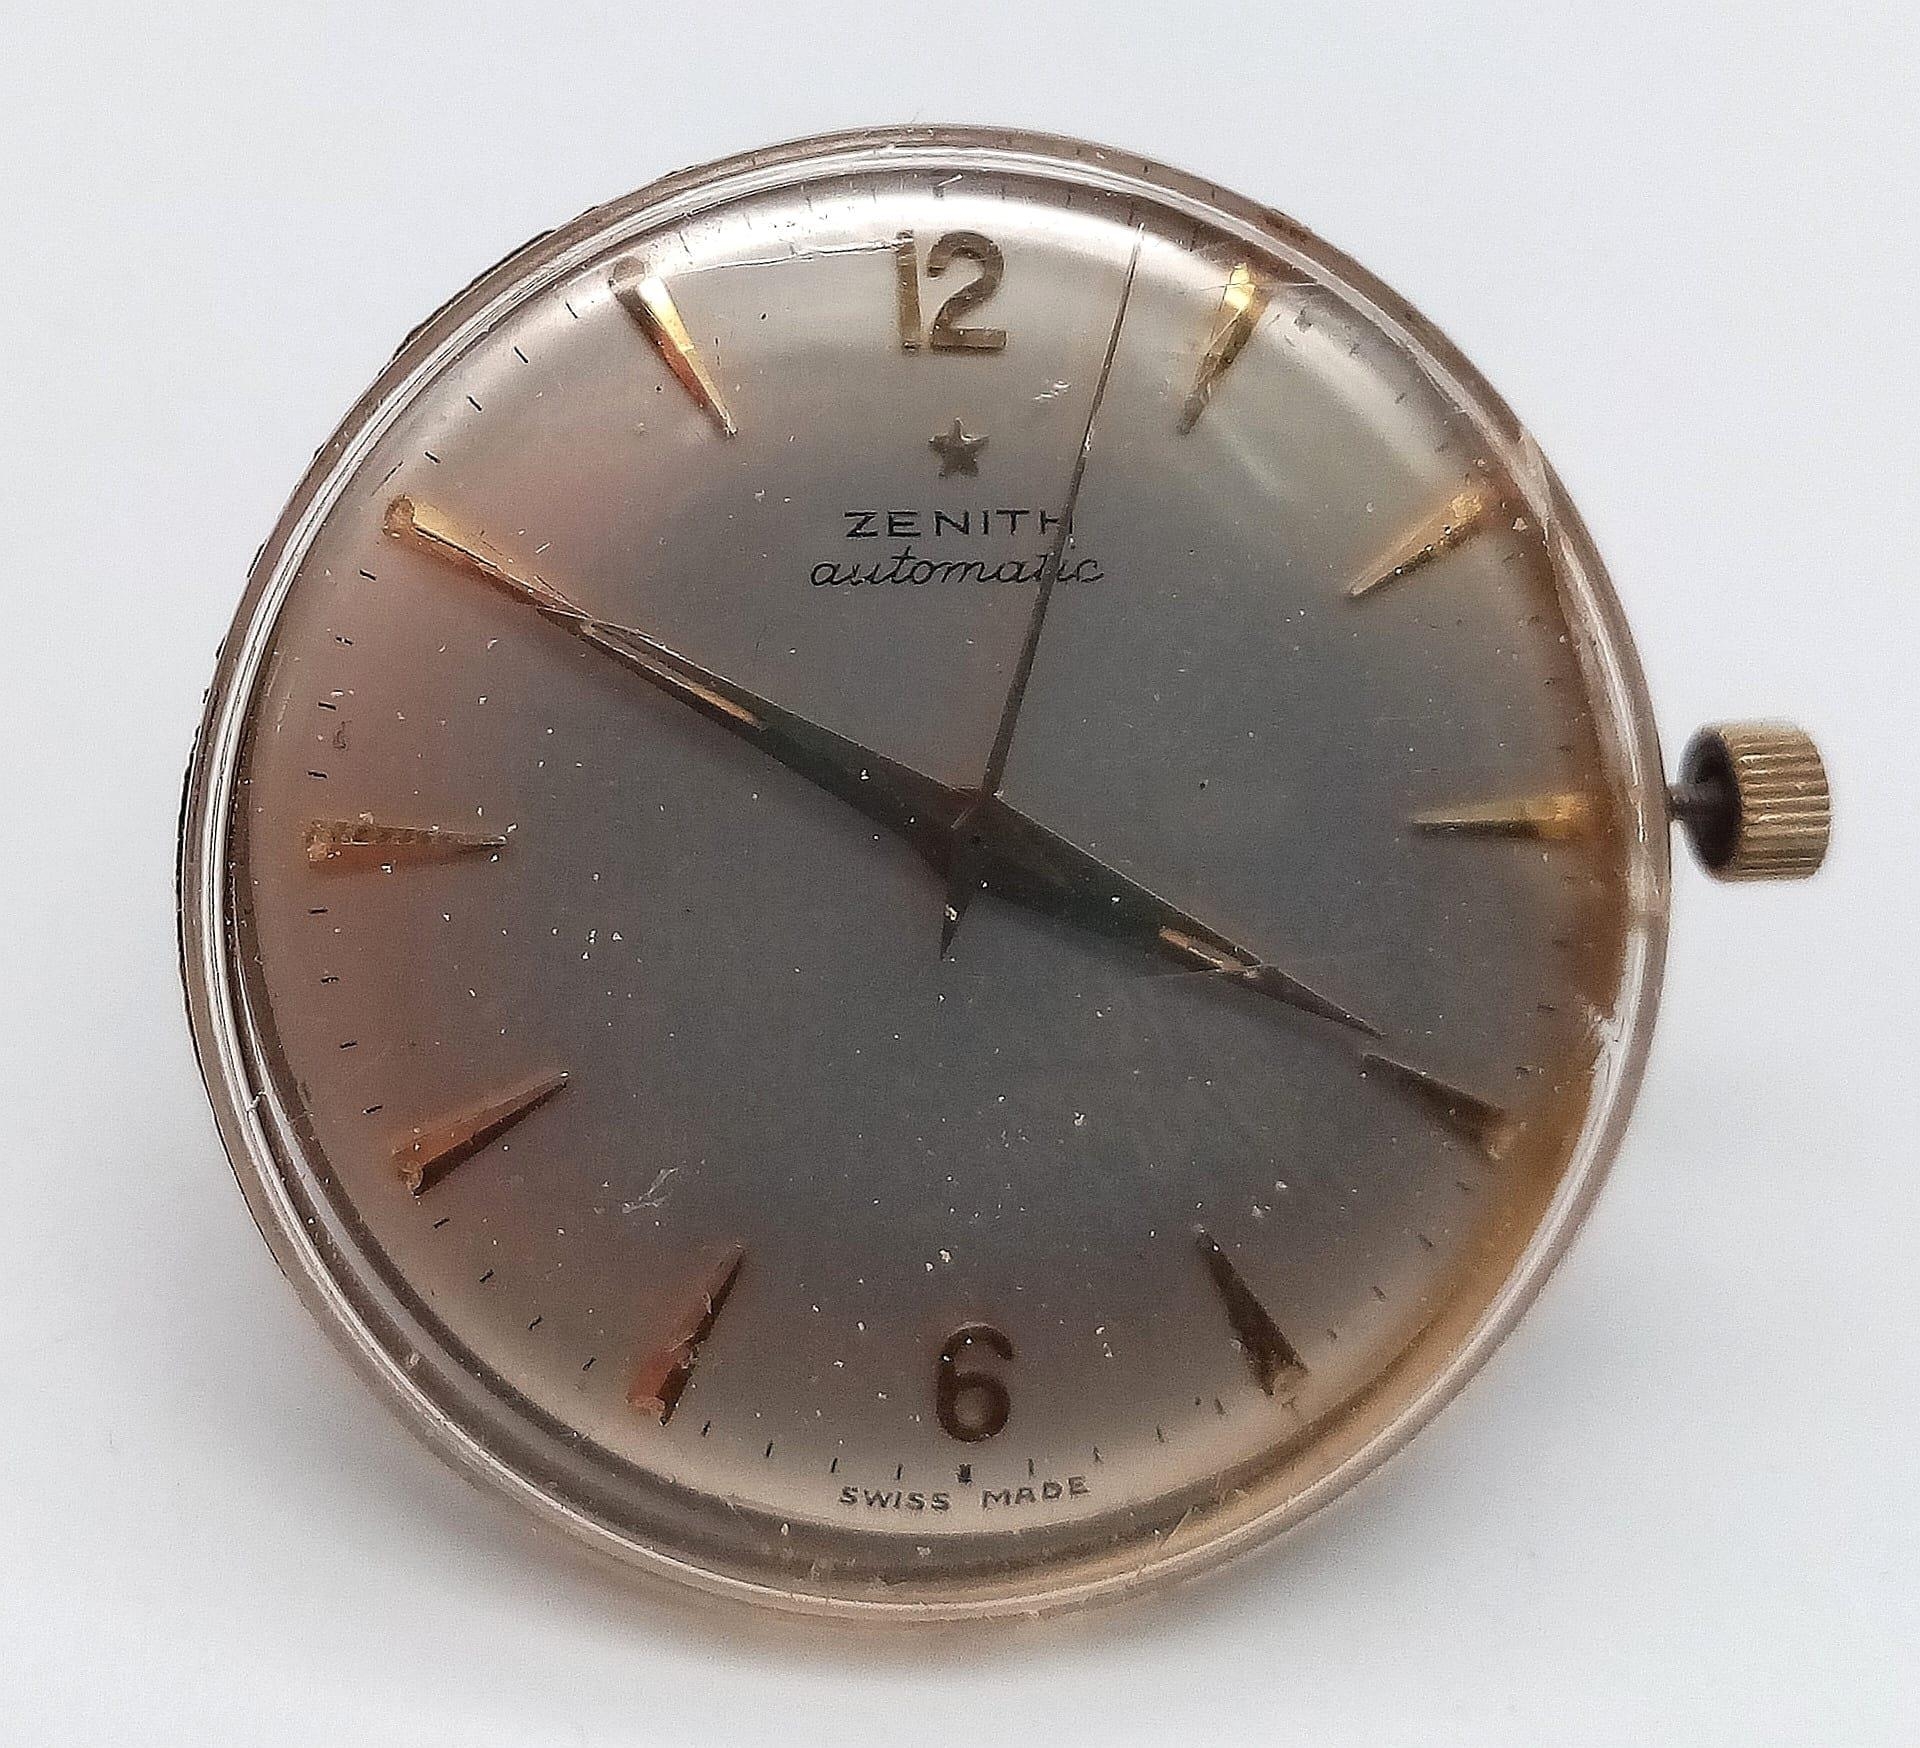 A ZENITH AUTOMATIC WATCH MOVEMENT AND PLEXI GLASS FULL WORKING ORDER AT TIME OF LISTING ref: AS 5005